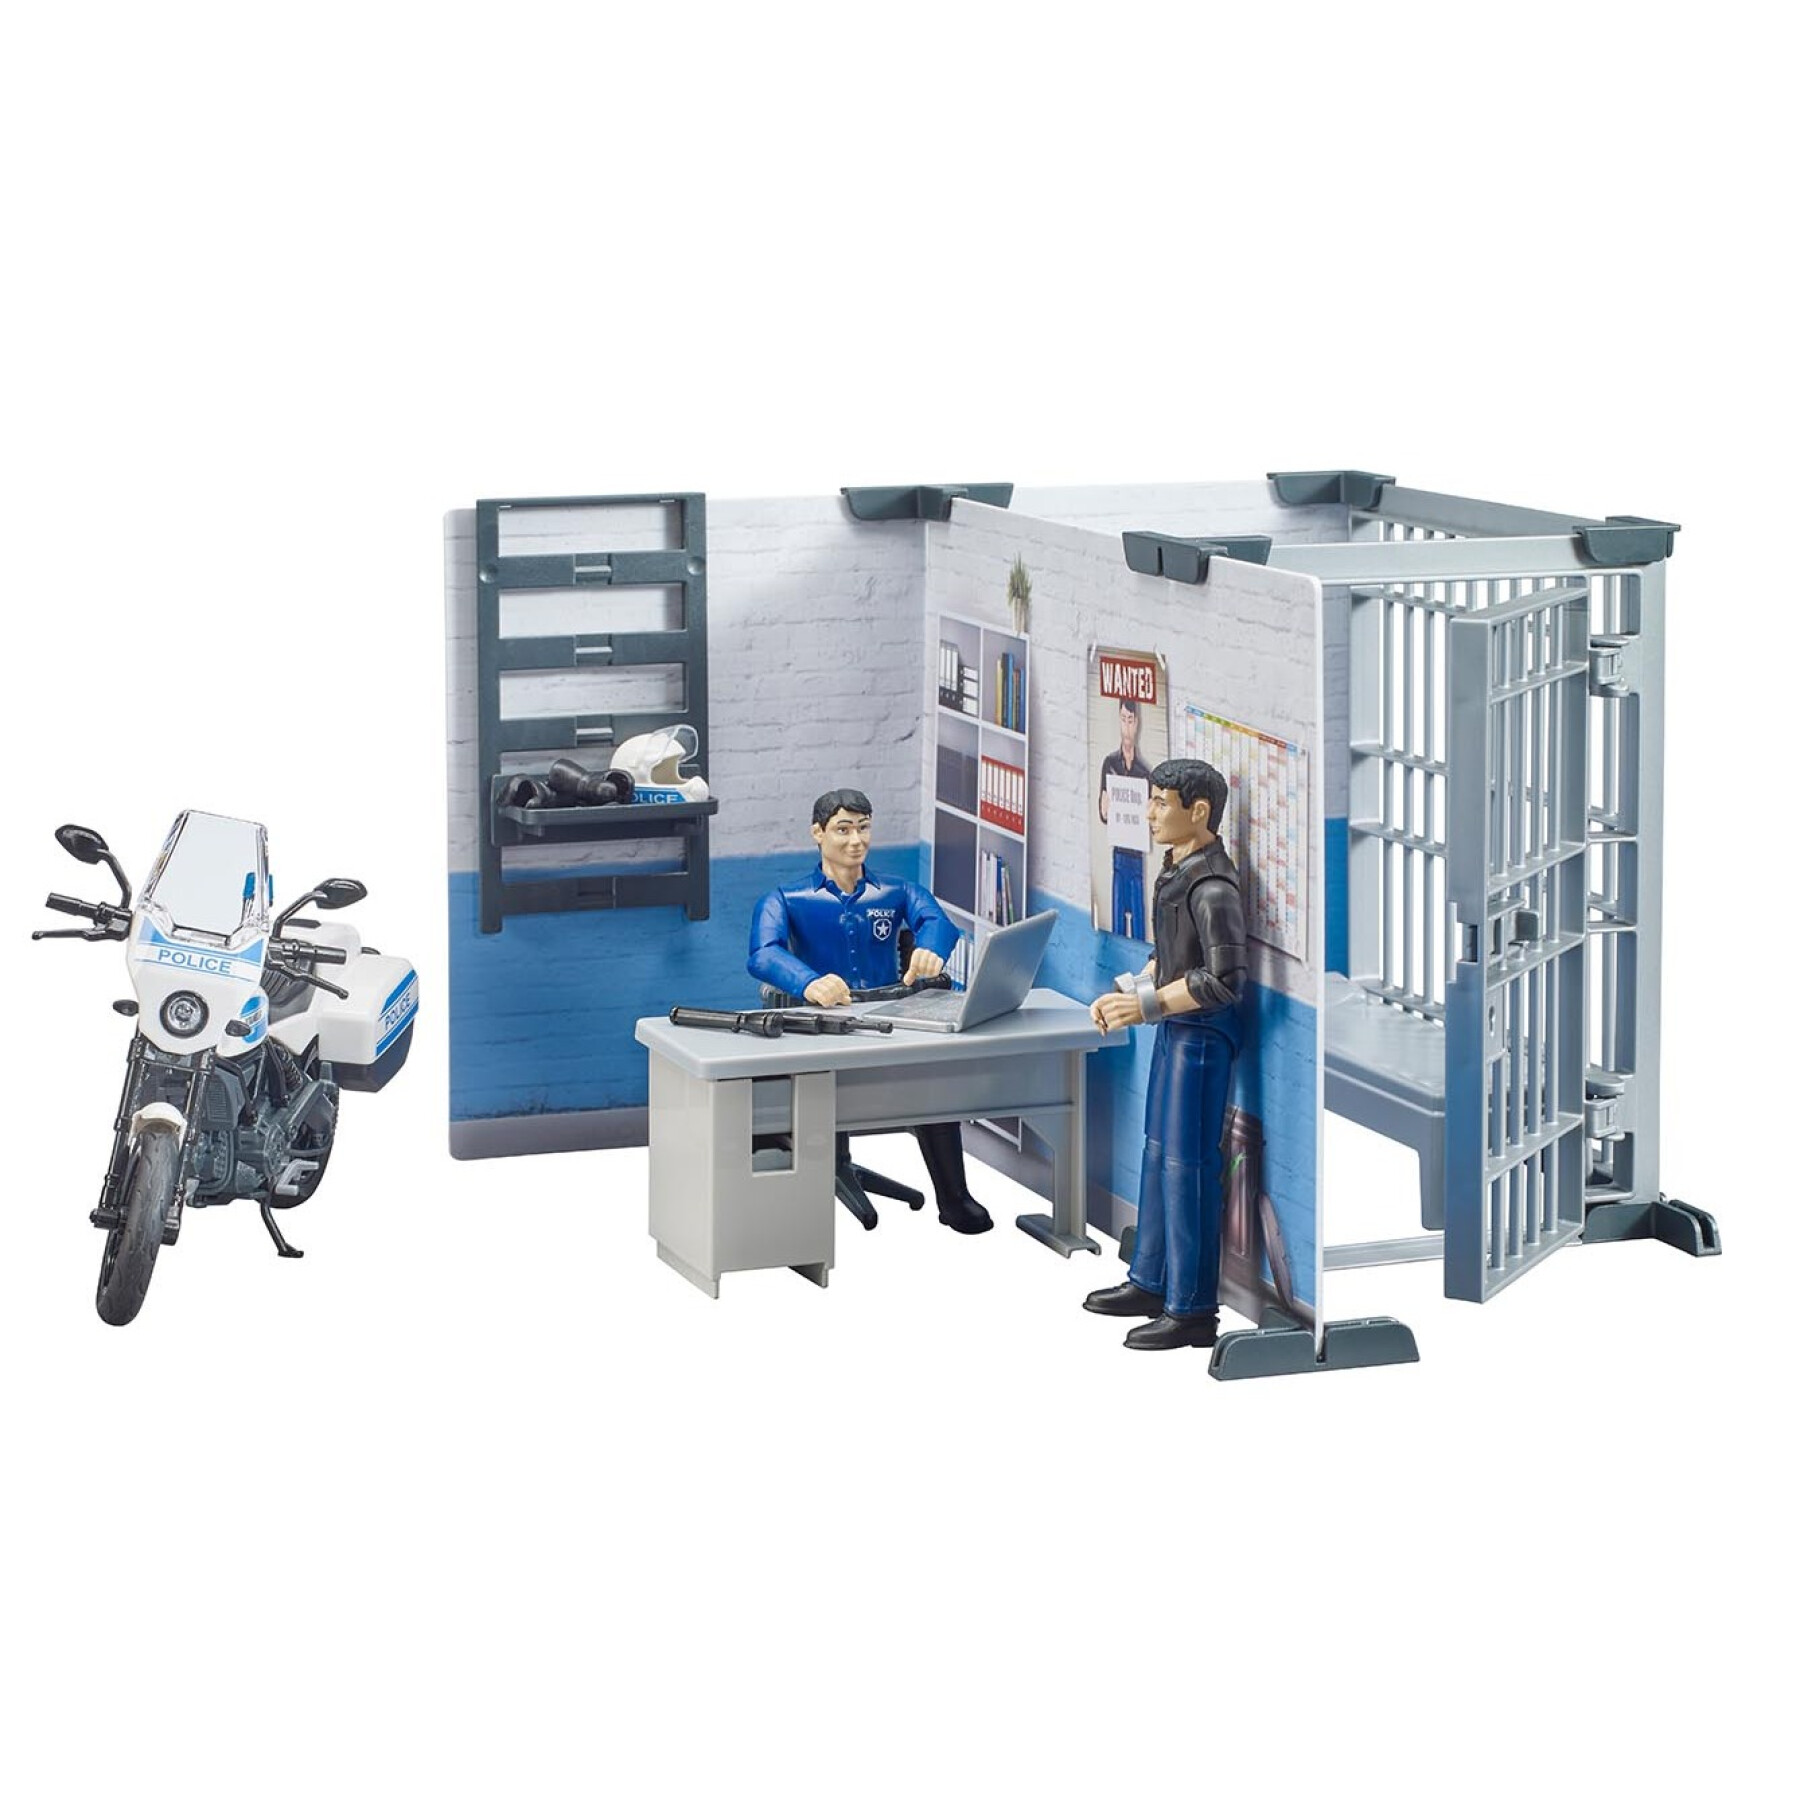 Figurine - Police station with police motorcycle Bruder